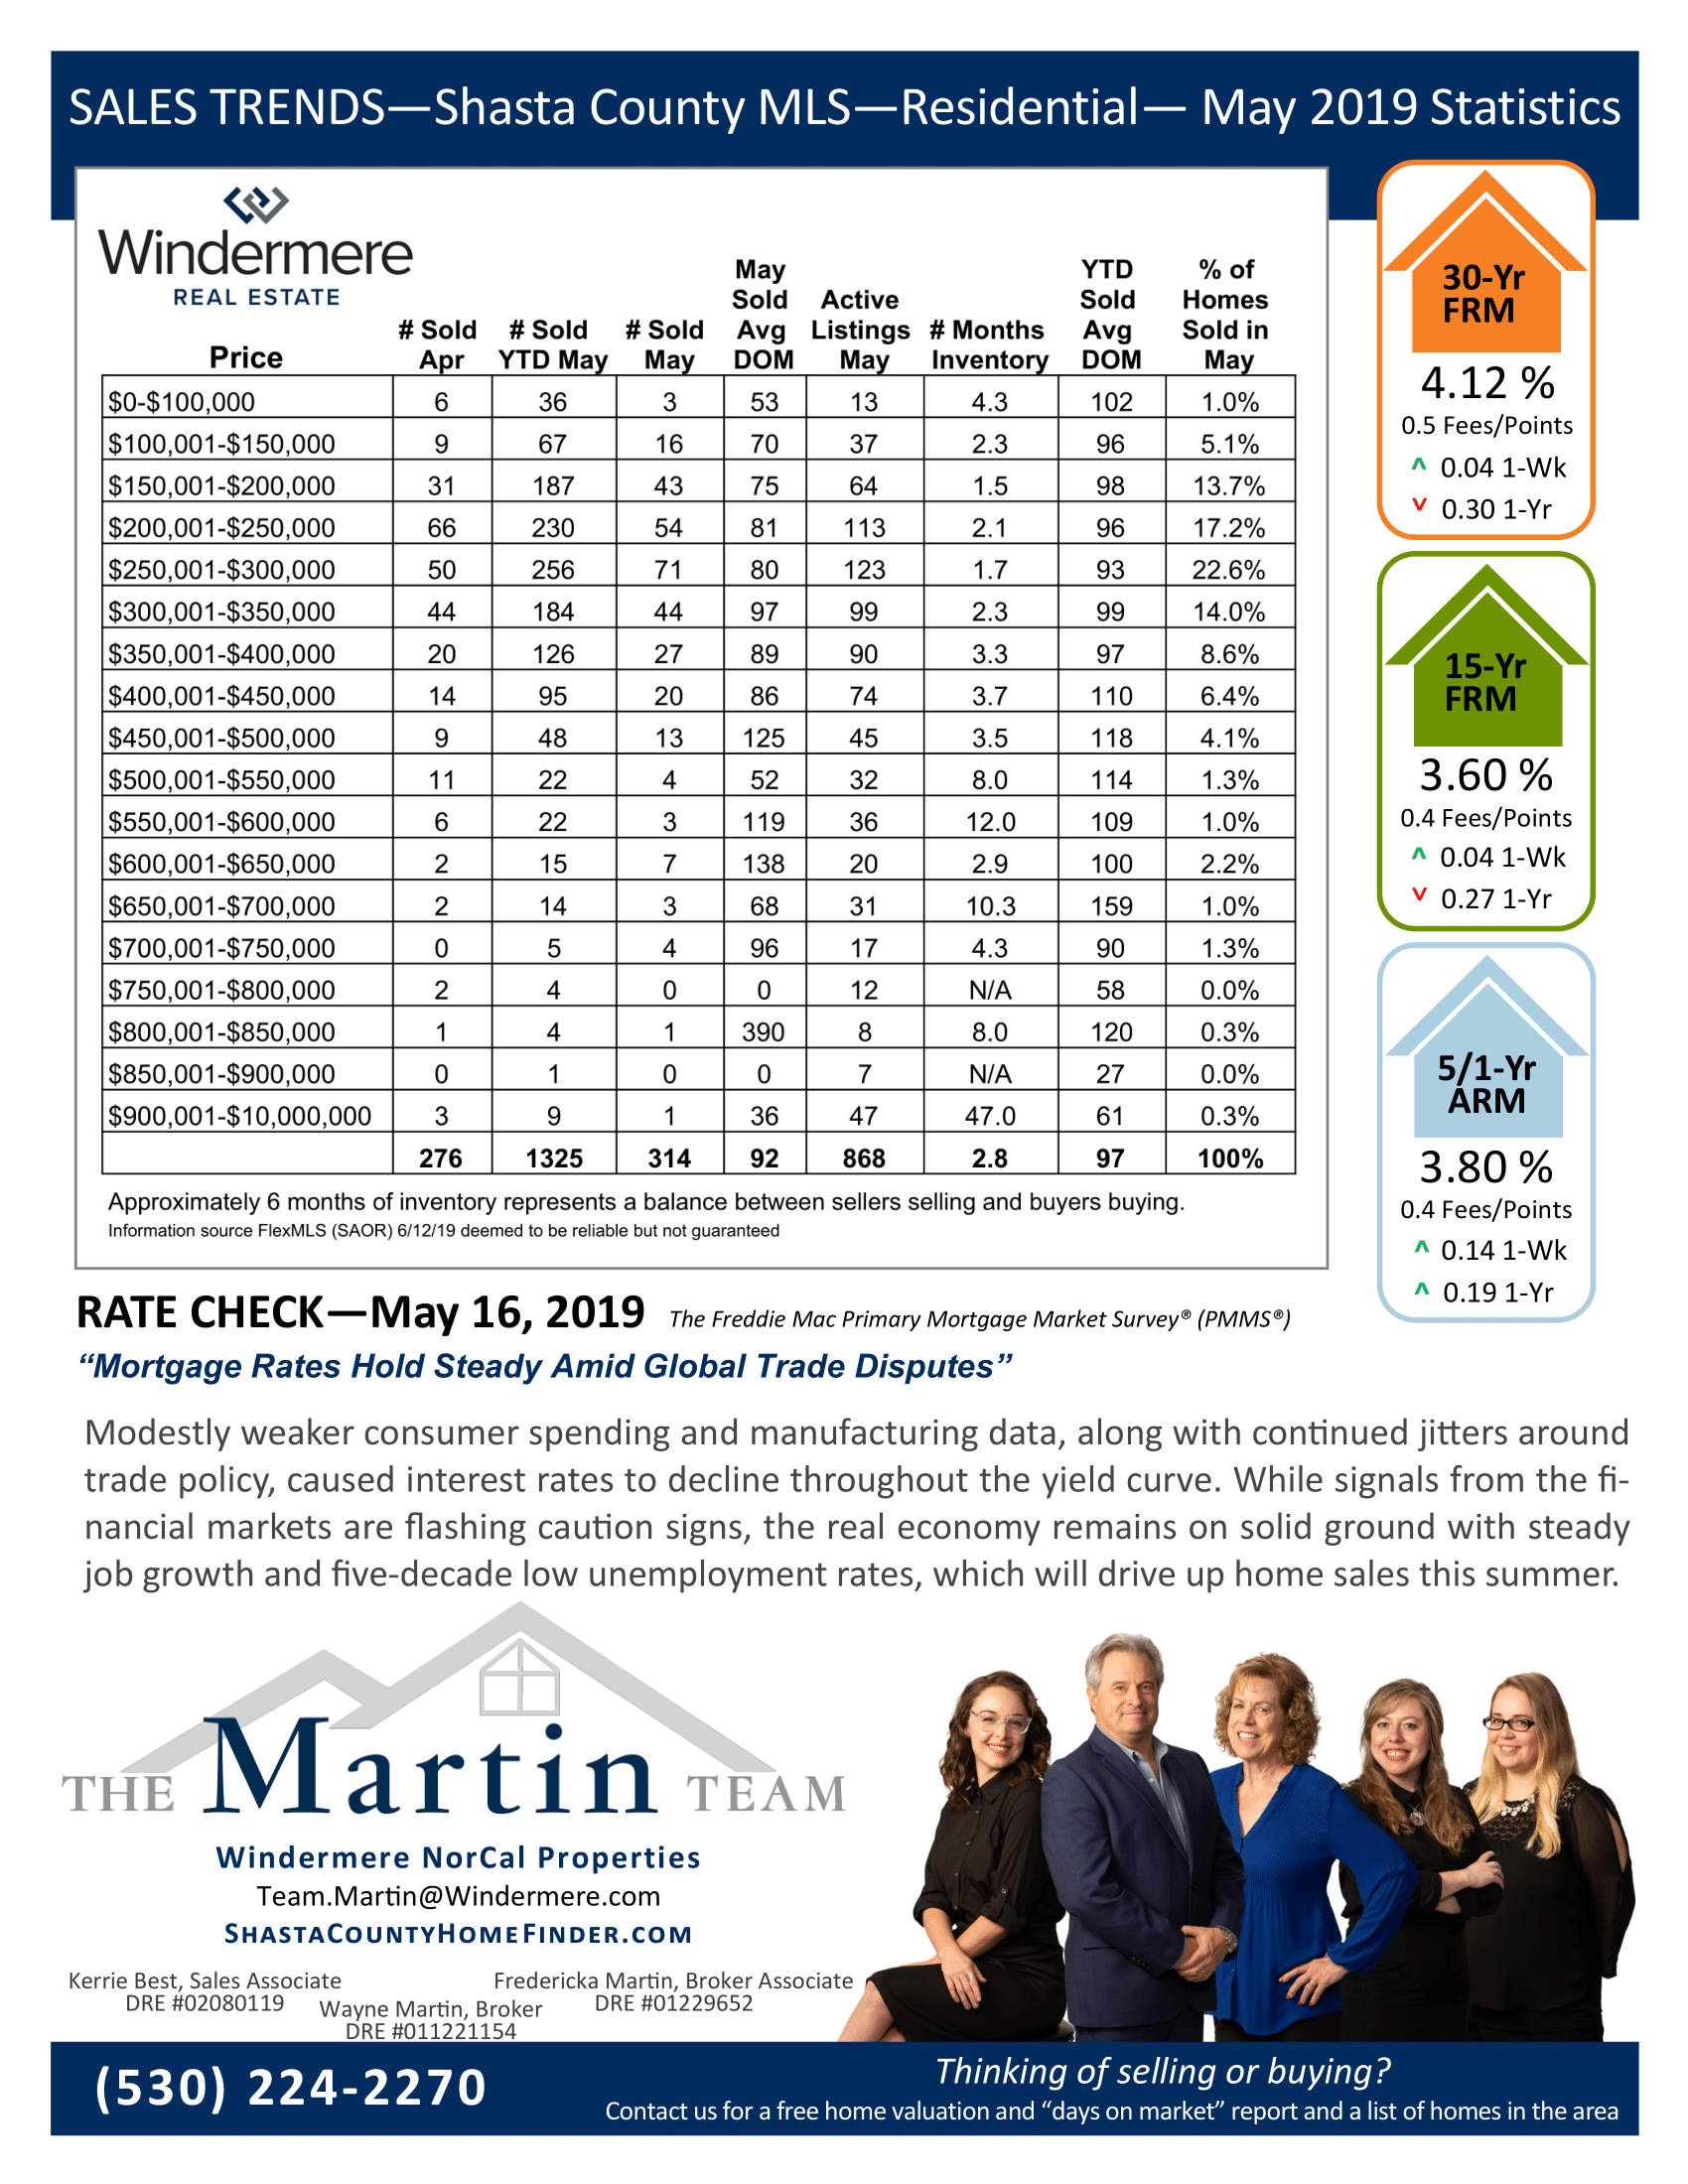 Sales Trends Reports May 2019. Mortgage rates and statistics on residential sales for May 2019.